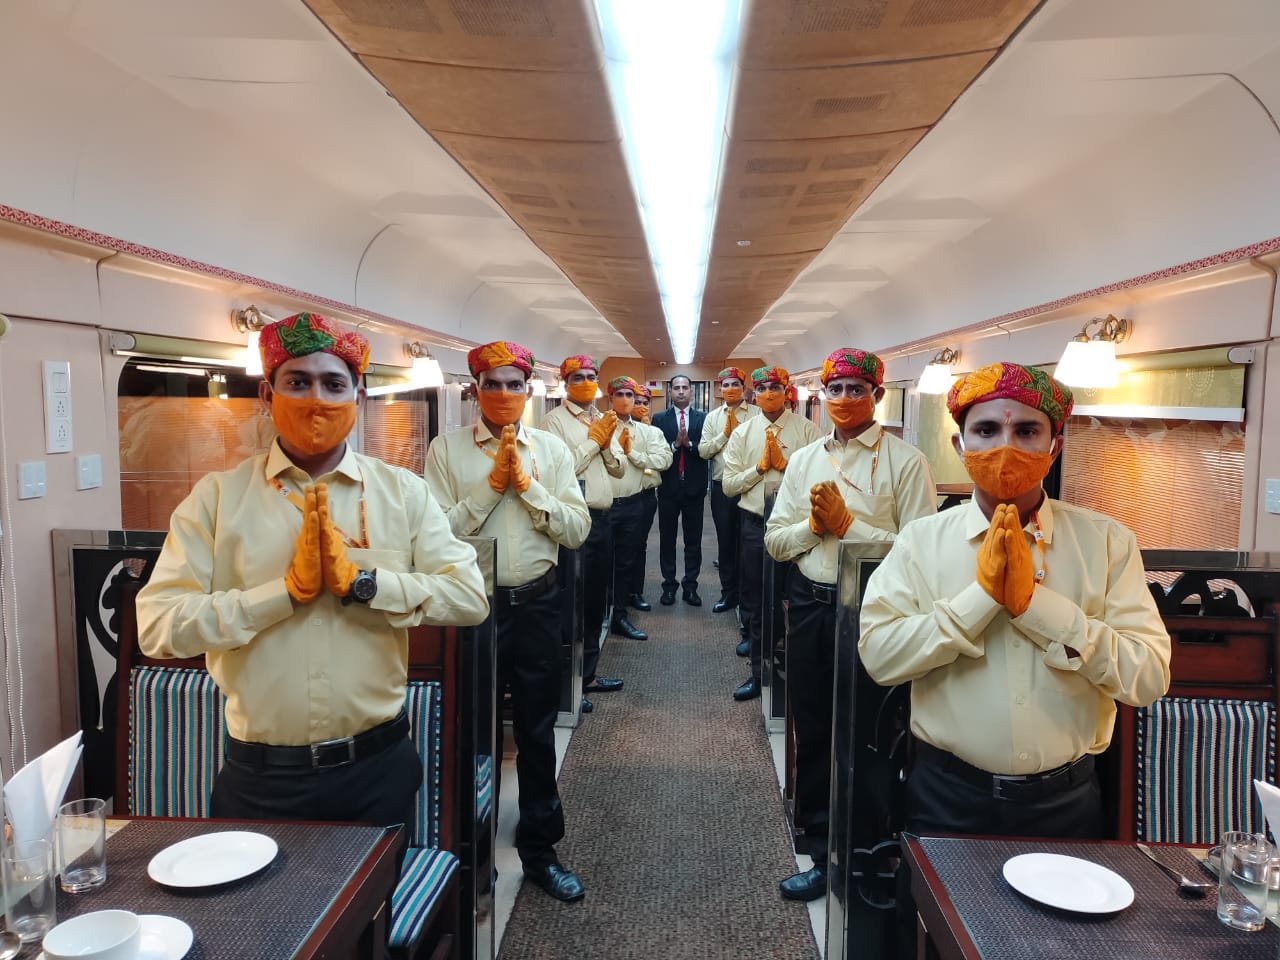 Ramayan Yatra Express will offer only vegetarian foods to travellers